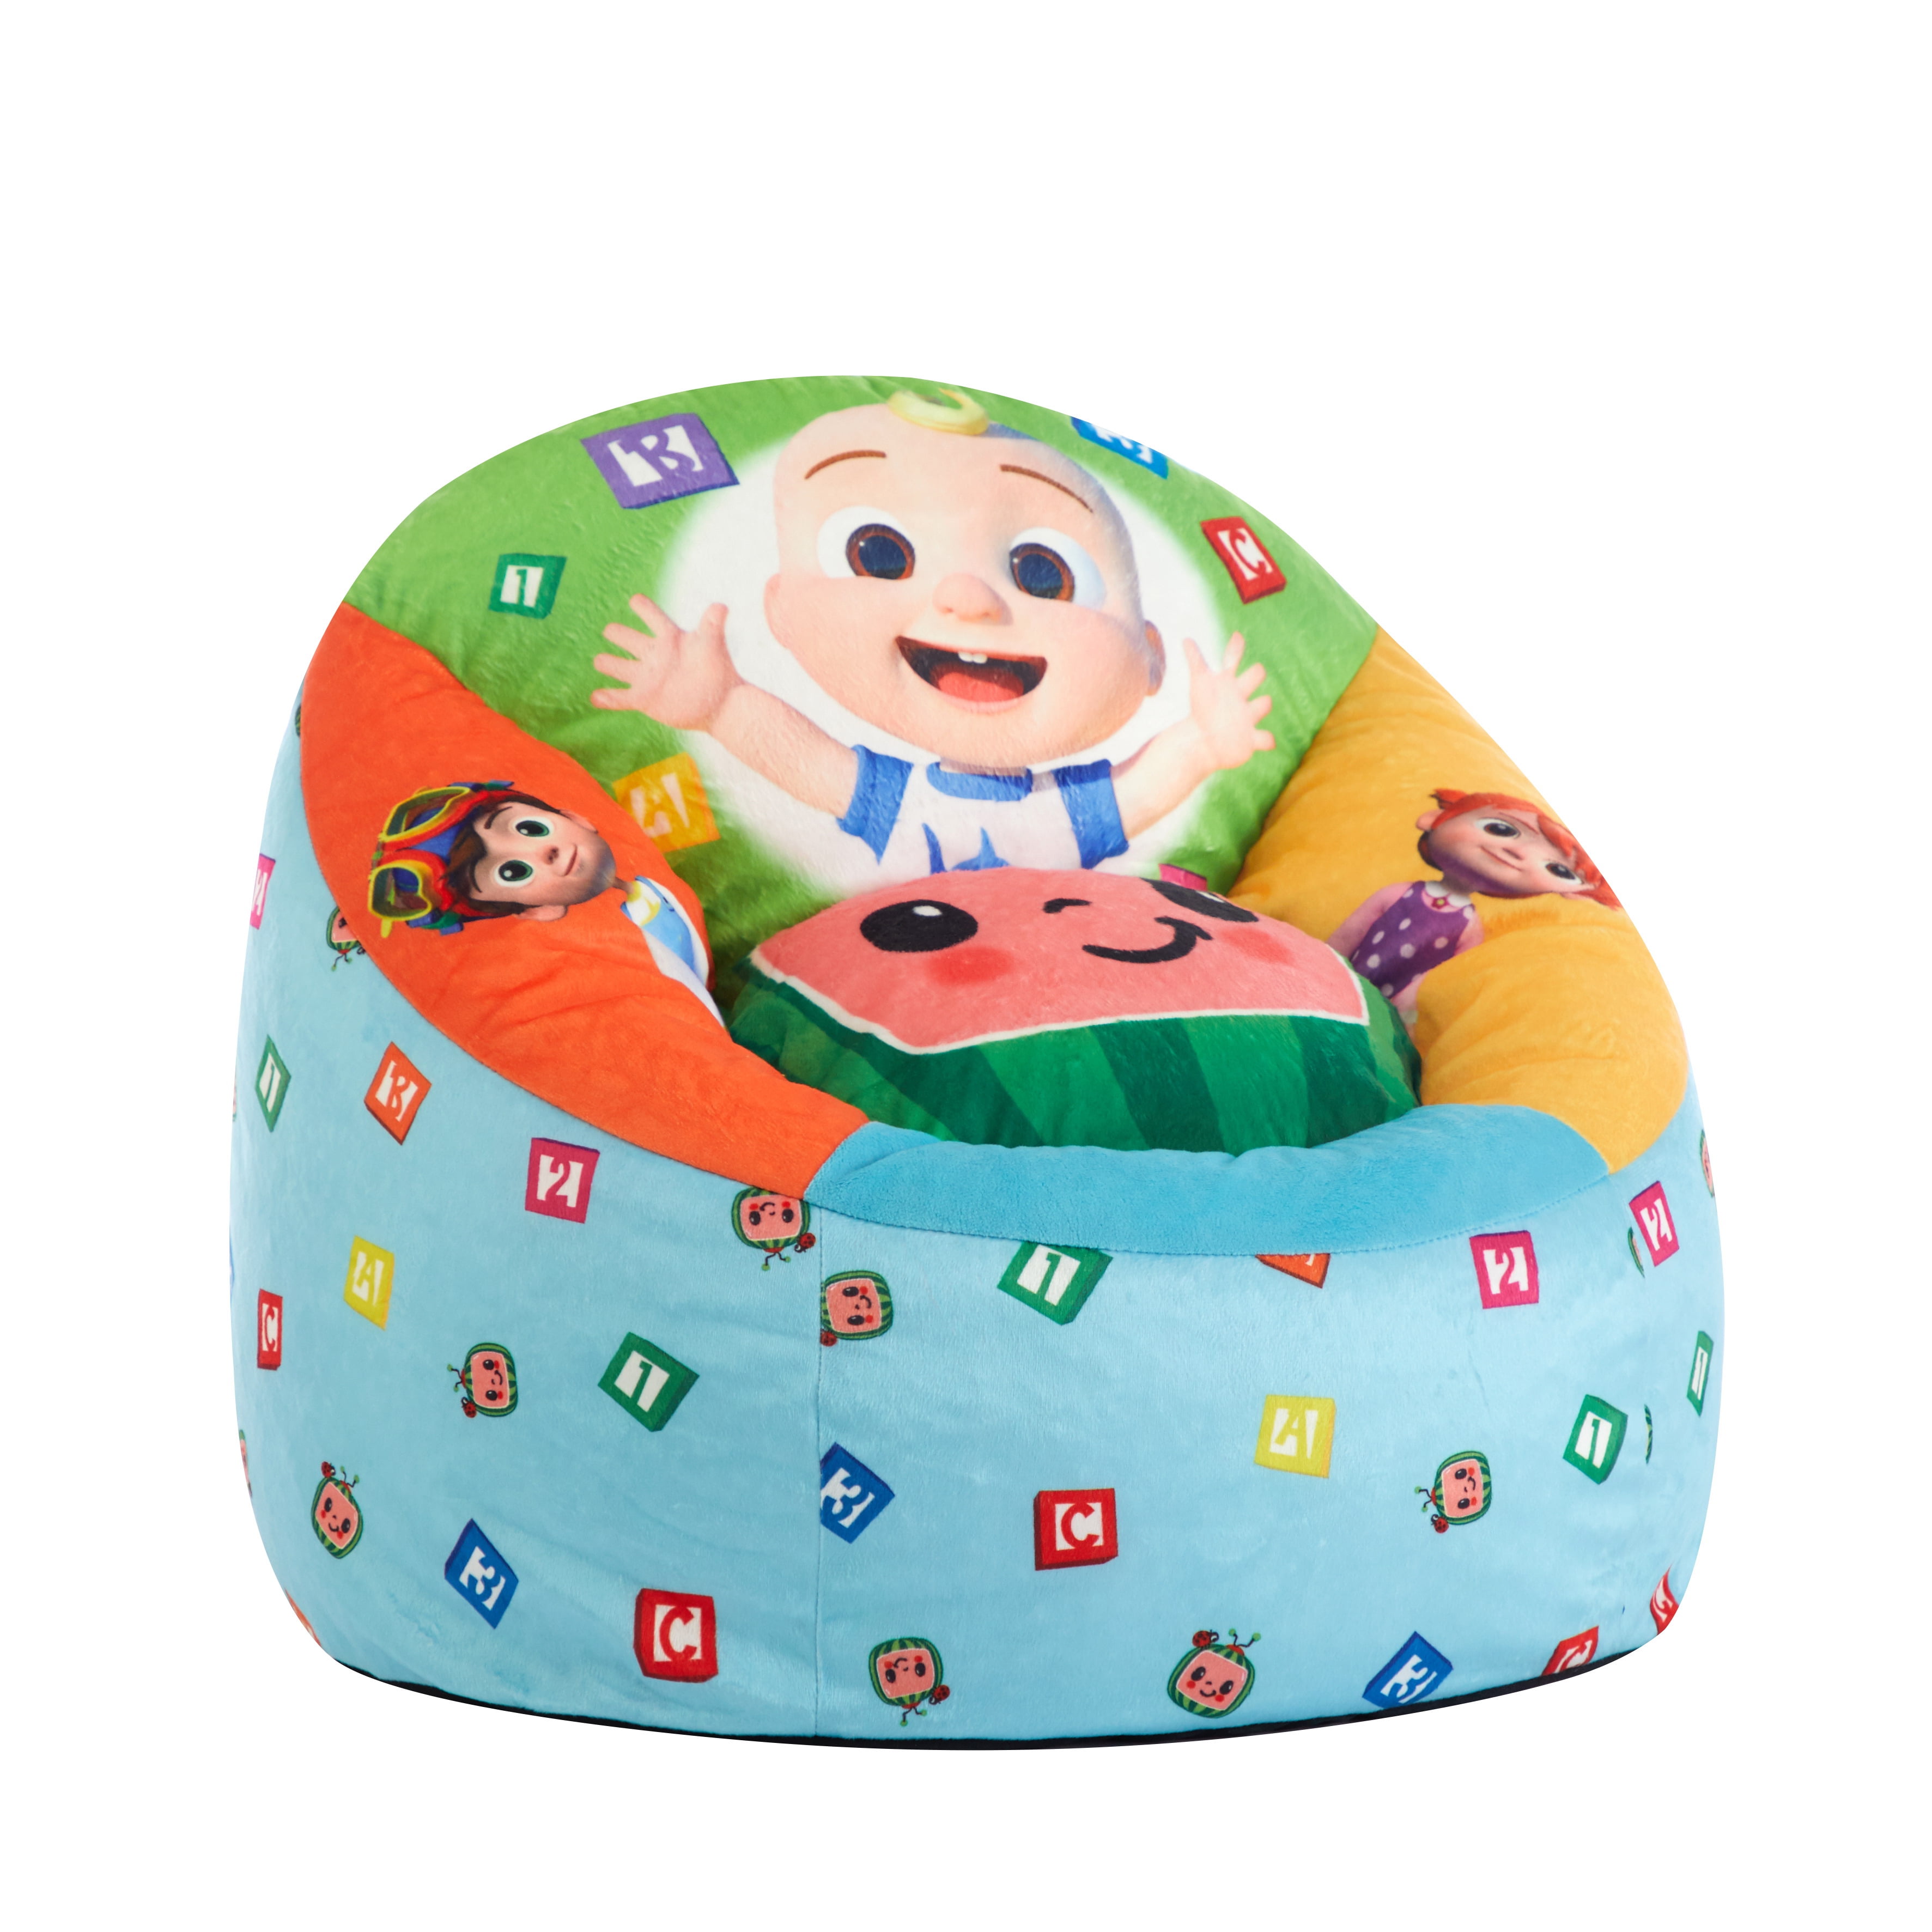 Cocomelon Blue Polyester Toddler Round Bean Bag Chair for Children's Room  Décor